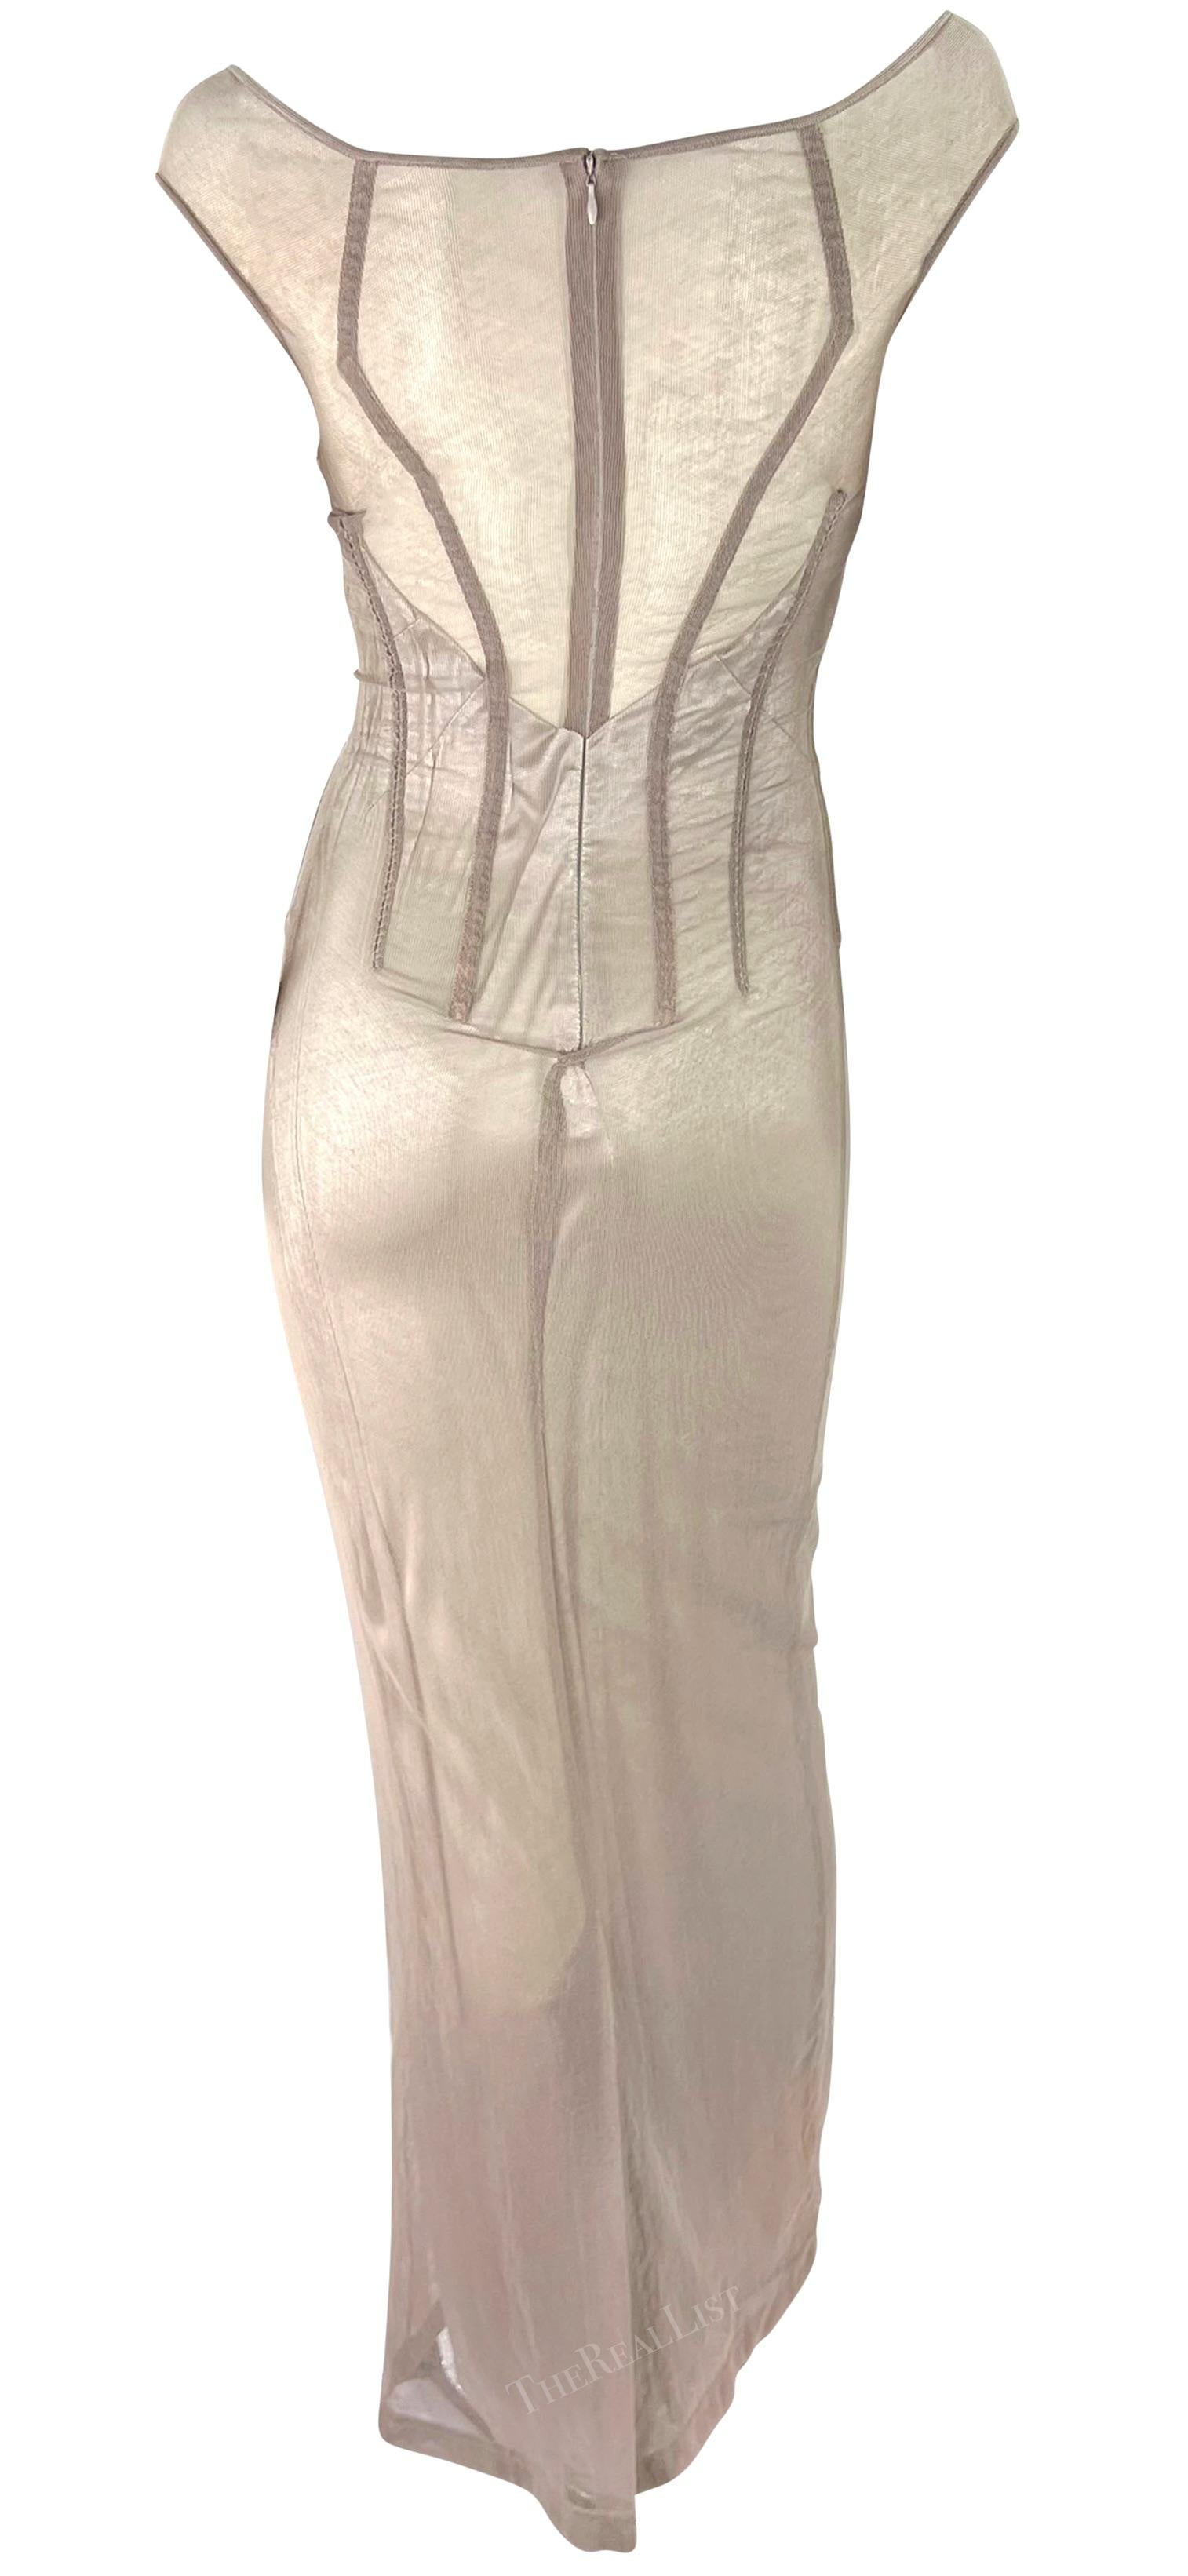 S/S 1998 Dolce & Gabbana 'Stromboli' Taupe Mesh Silver Bodycon Boned Gown  For Sale 1